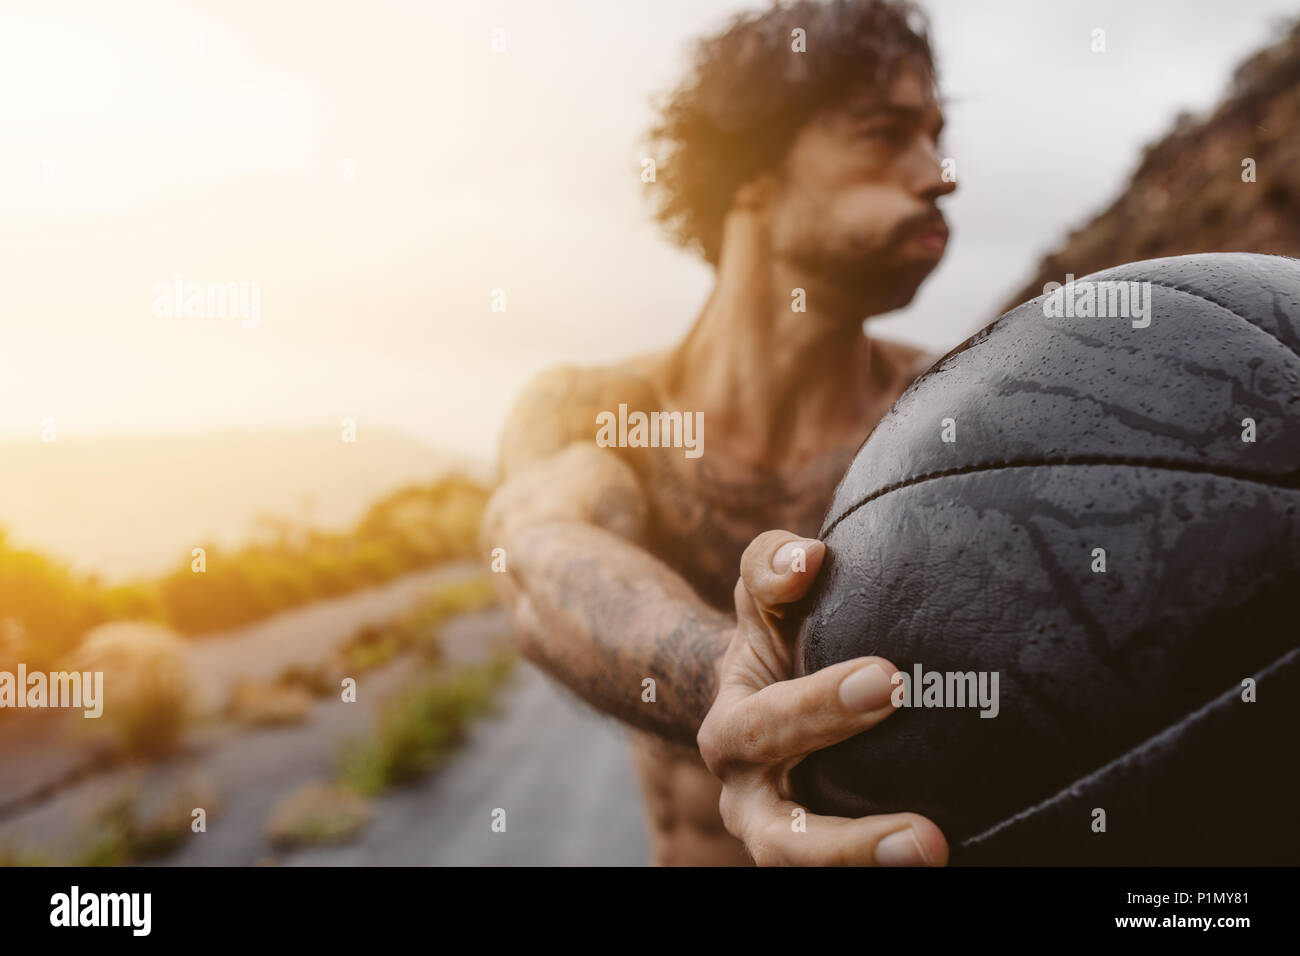 Hand of young man exercising with medicine ball outdoor. Sportsman exercising outdoors on a rainy day. Stock Photo